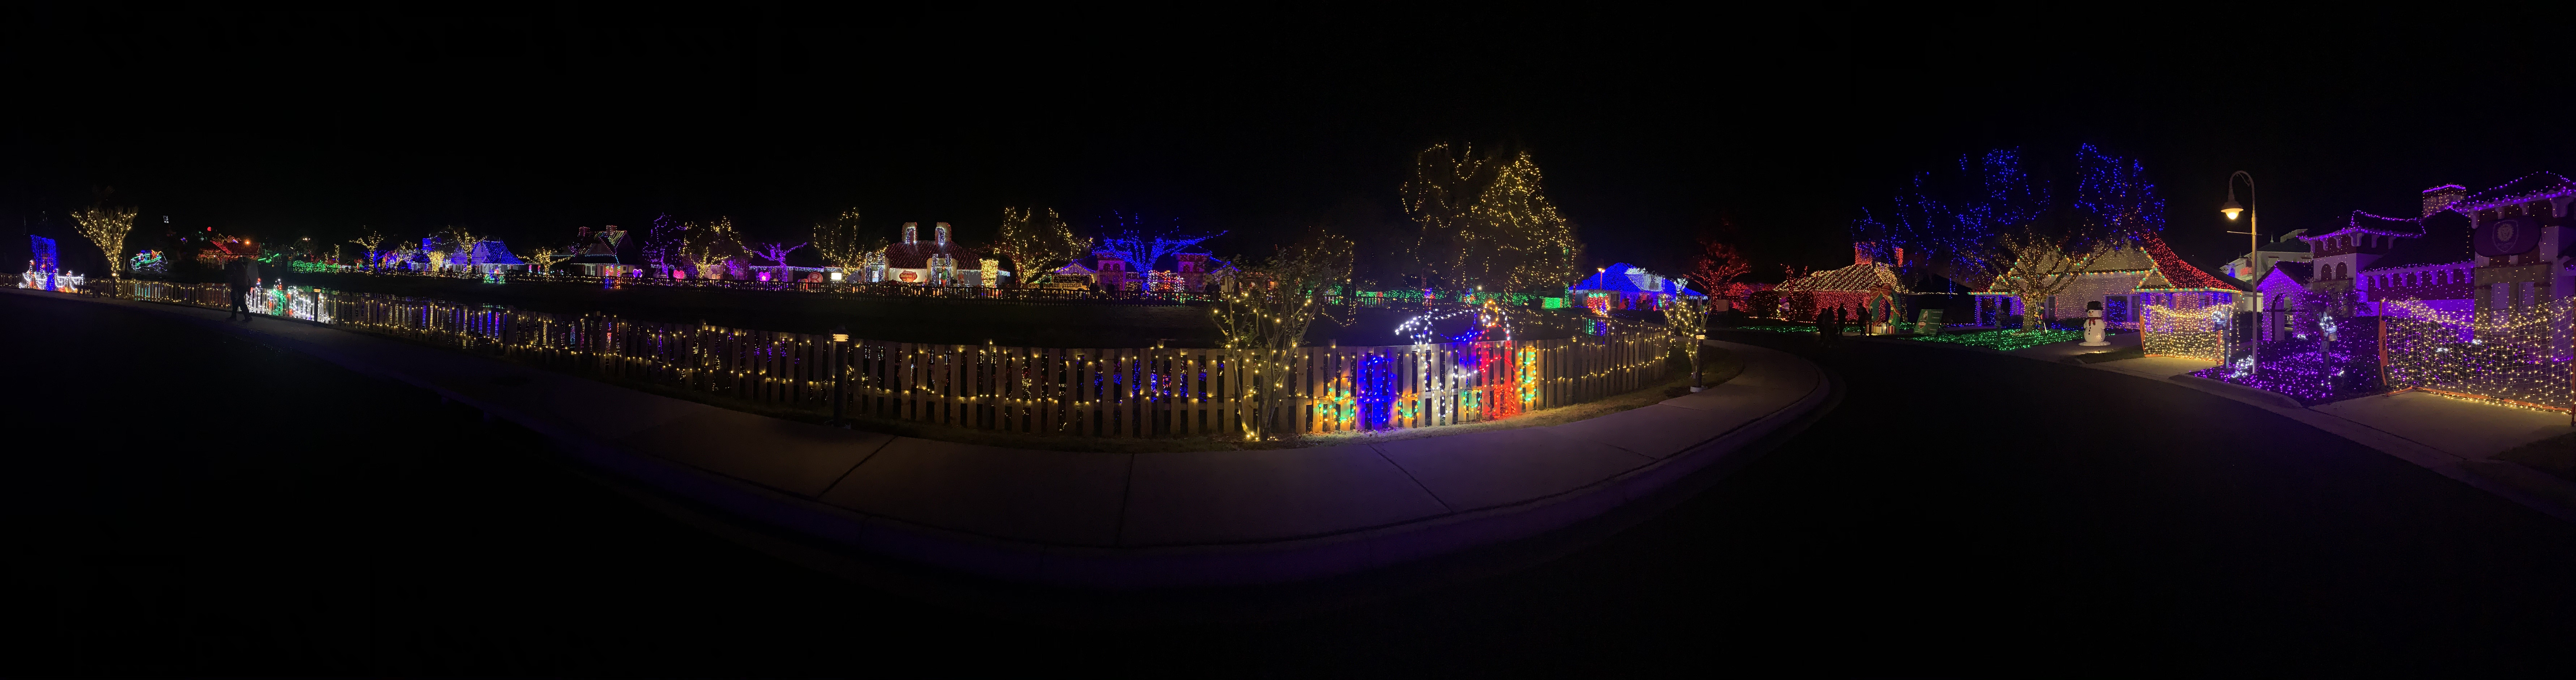 a fence with lights on it at night